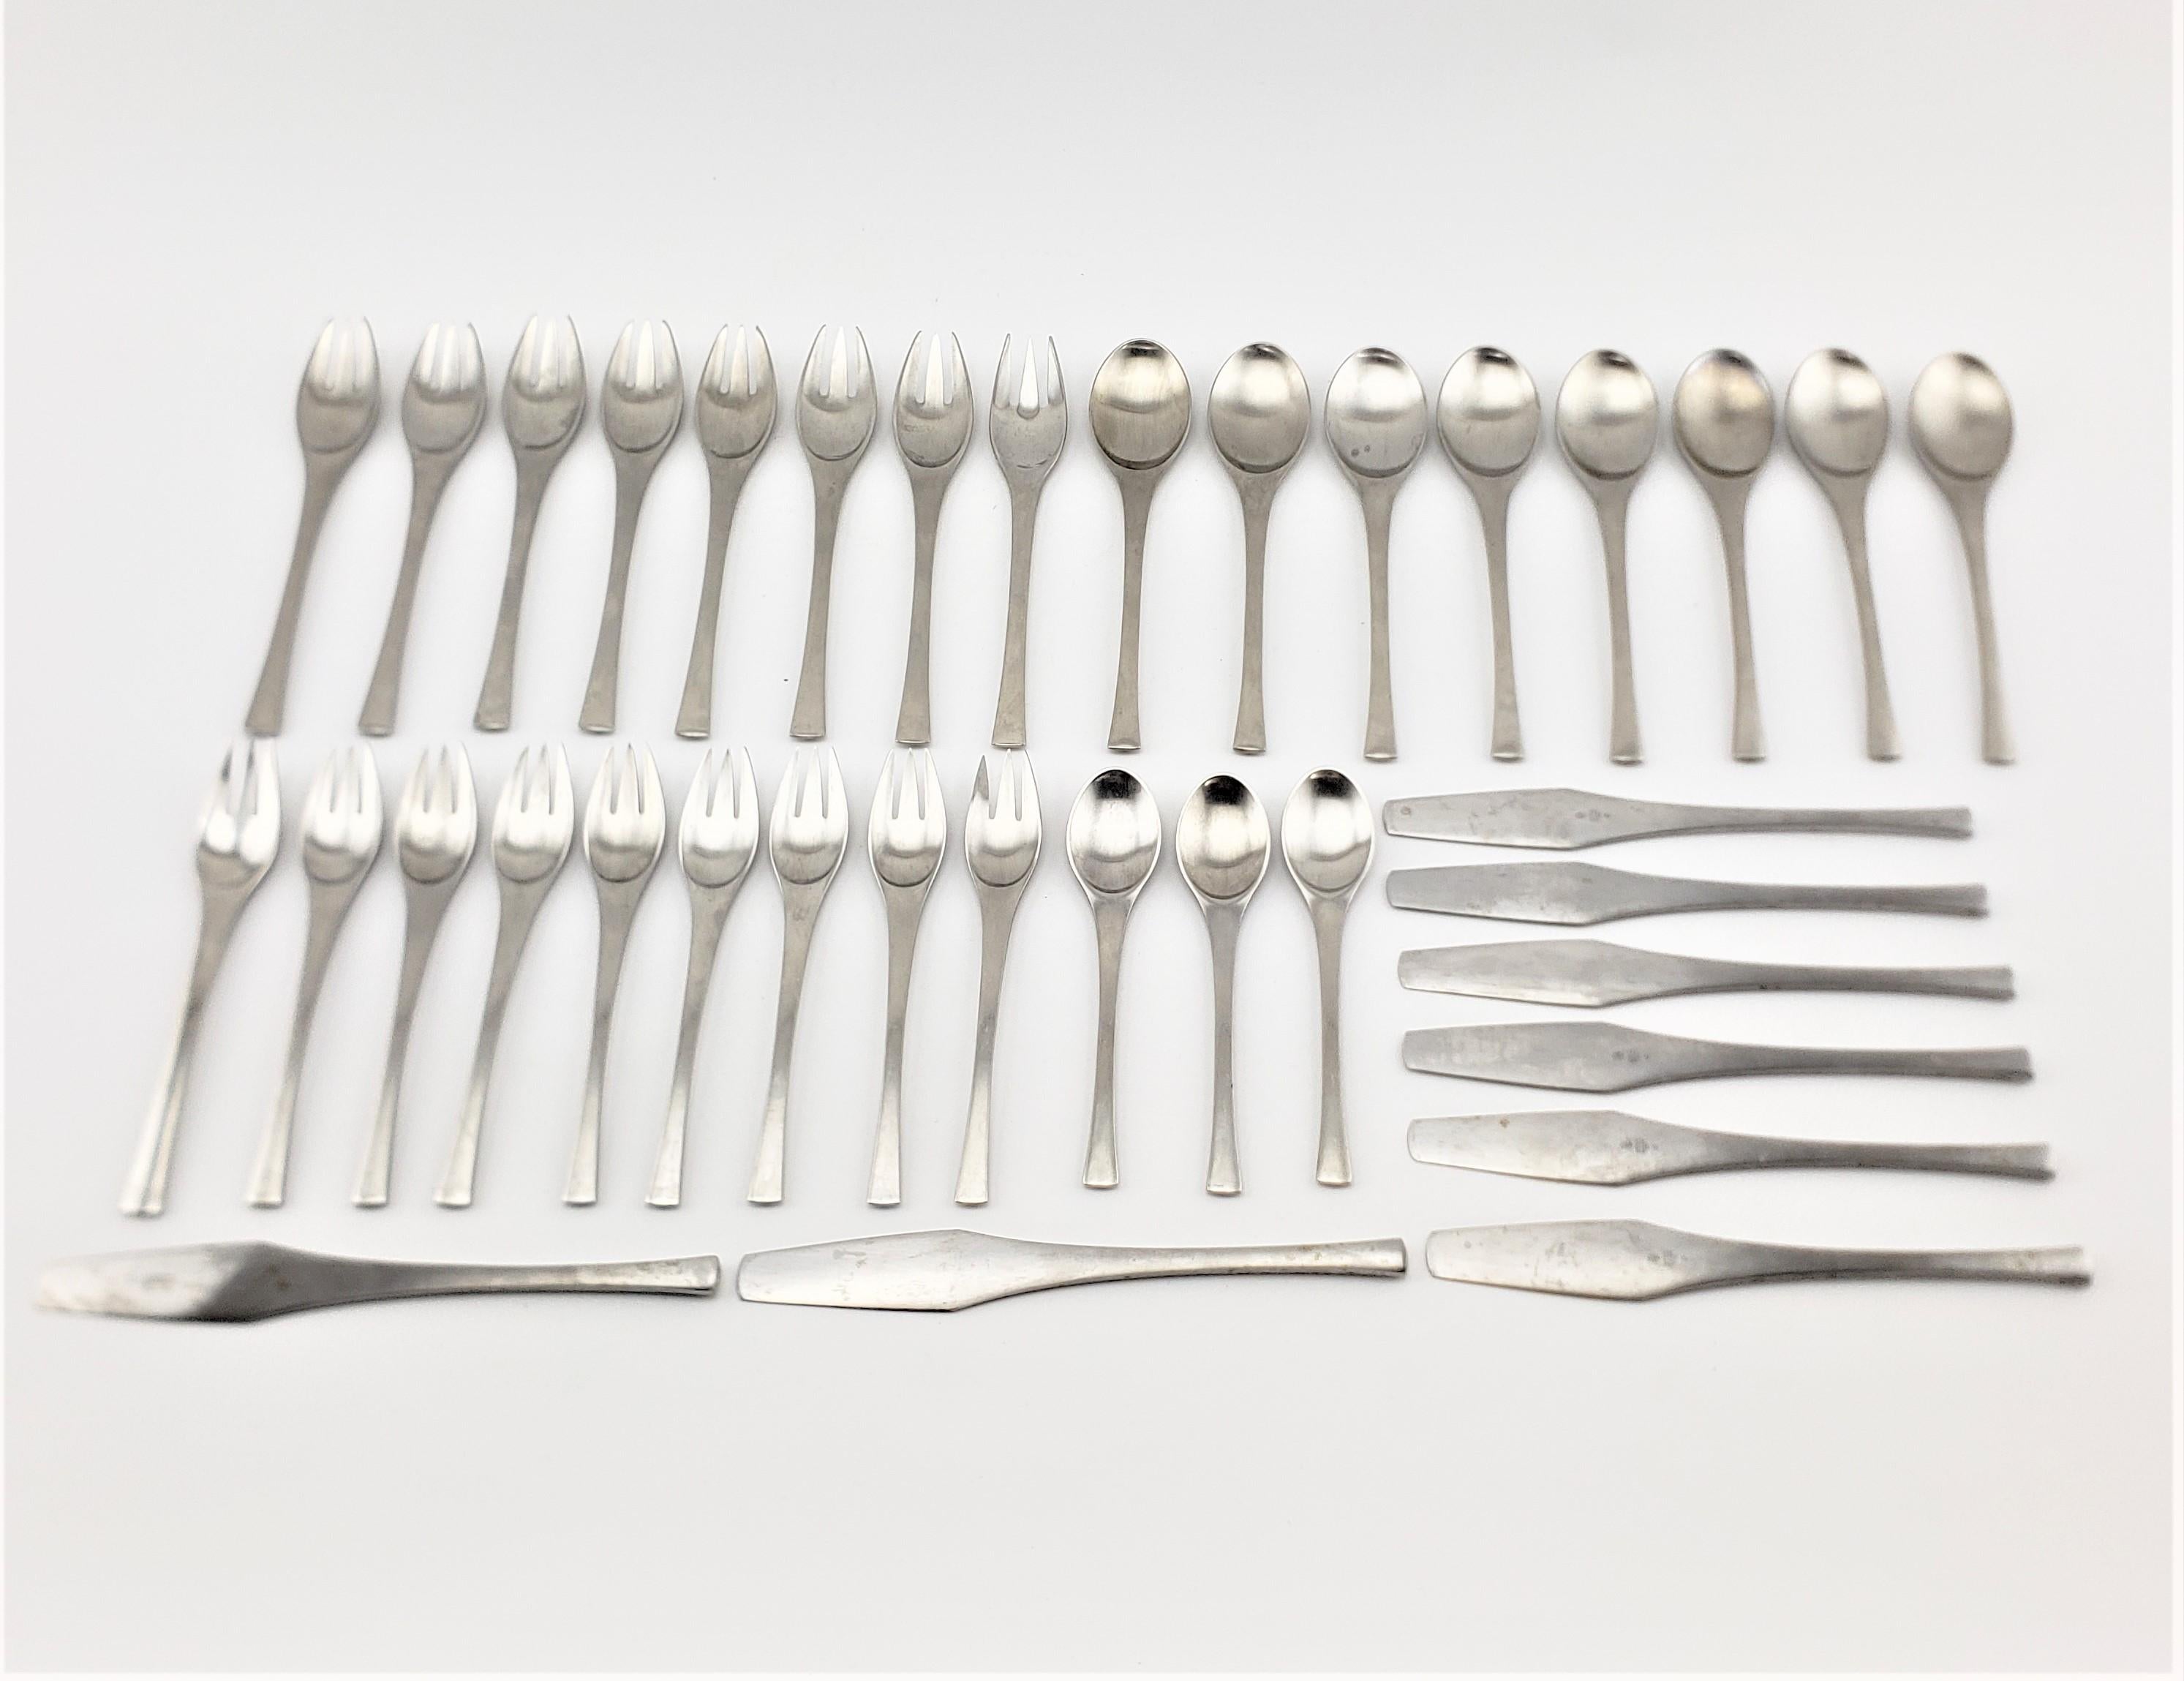 This Mid-Century Modern stainless steel thirty six piece flatware set was made by Dansk in Germany in the Odin pattern. The set is in very good period condition showing only minor surface wear as presented in the photos and consistent with age and